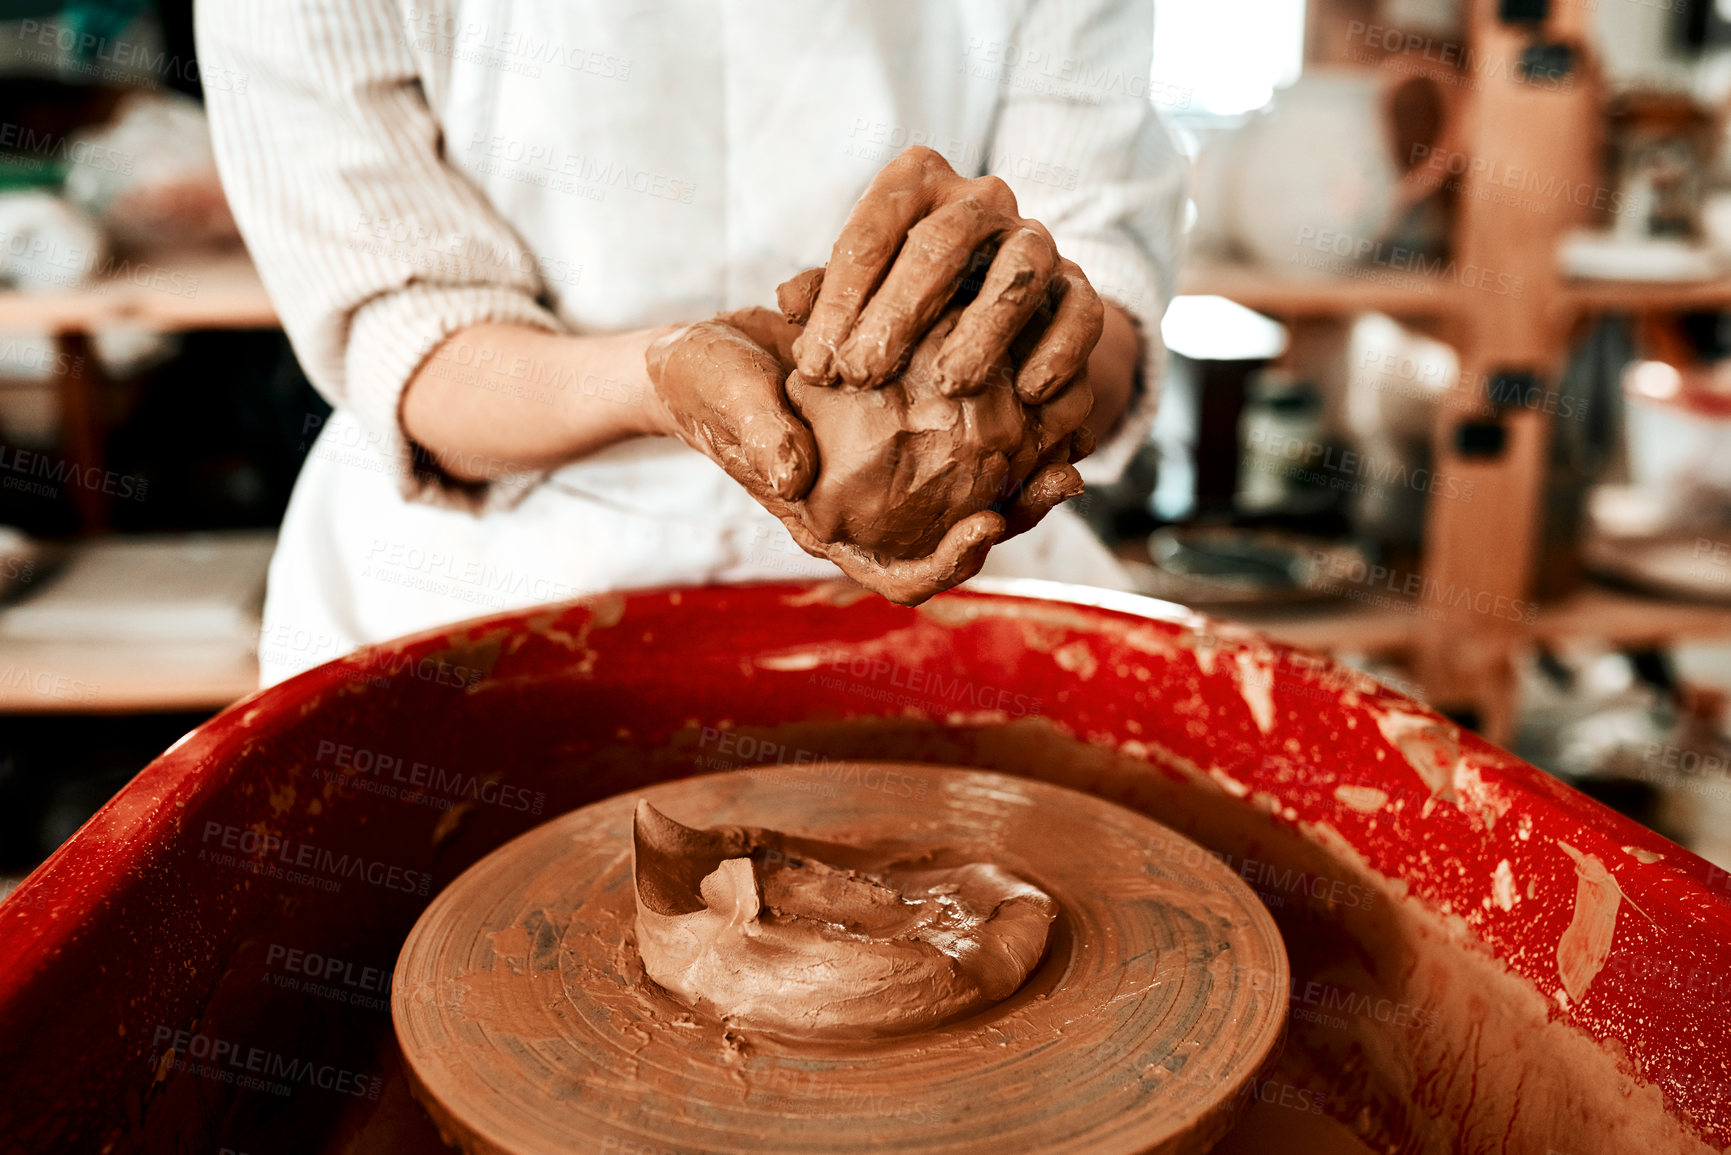 Buy stock photo Cropped shot of an unrecognizable woman molding clay on a pottery wheel